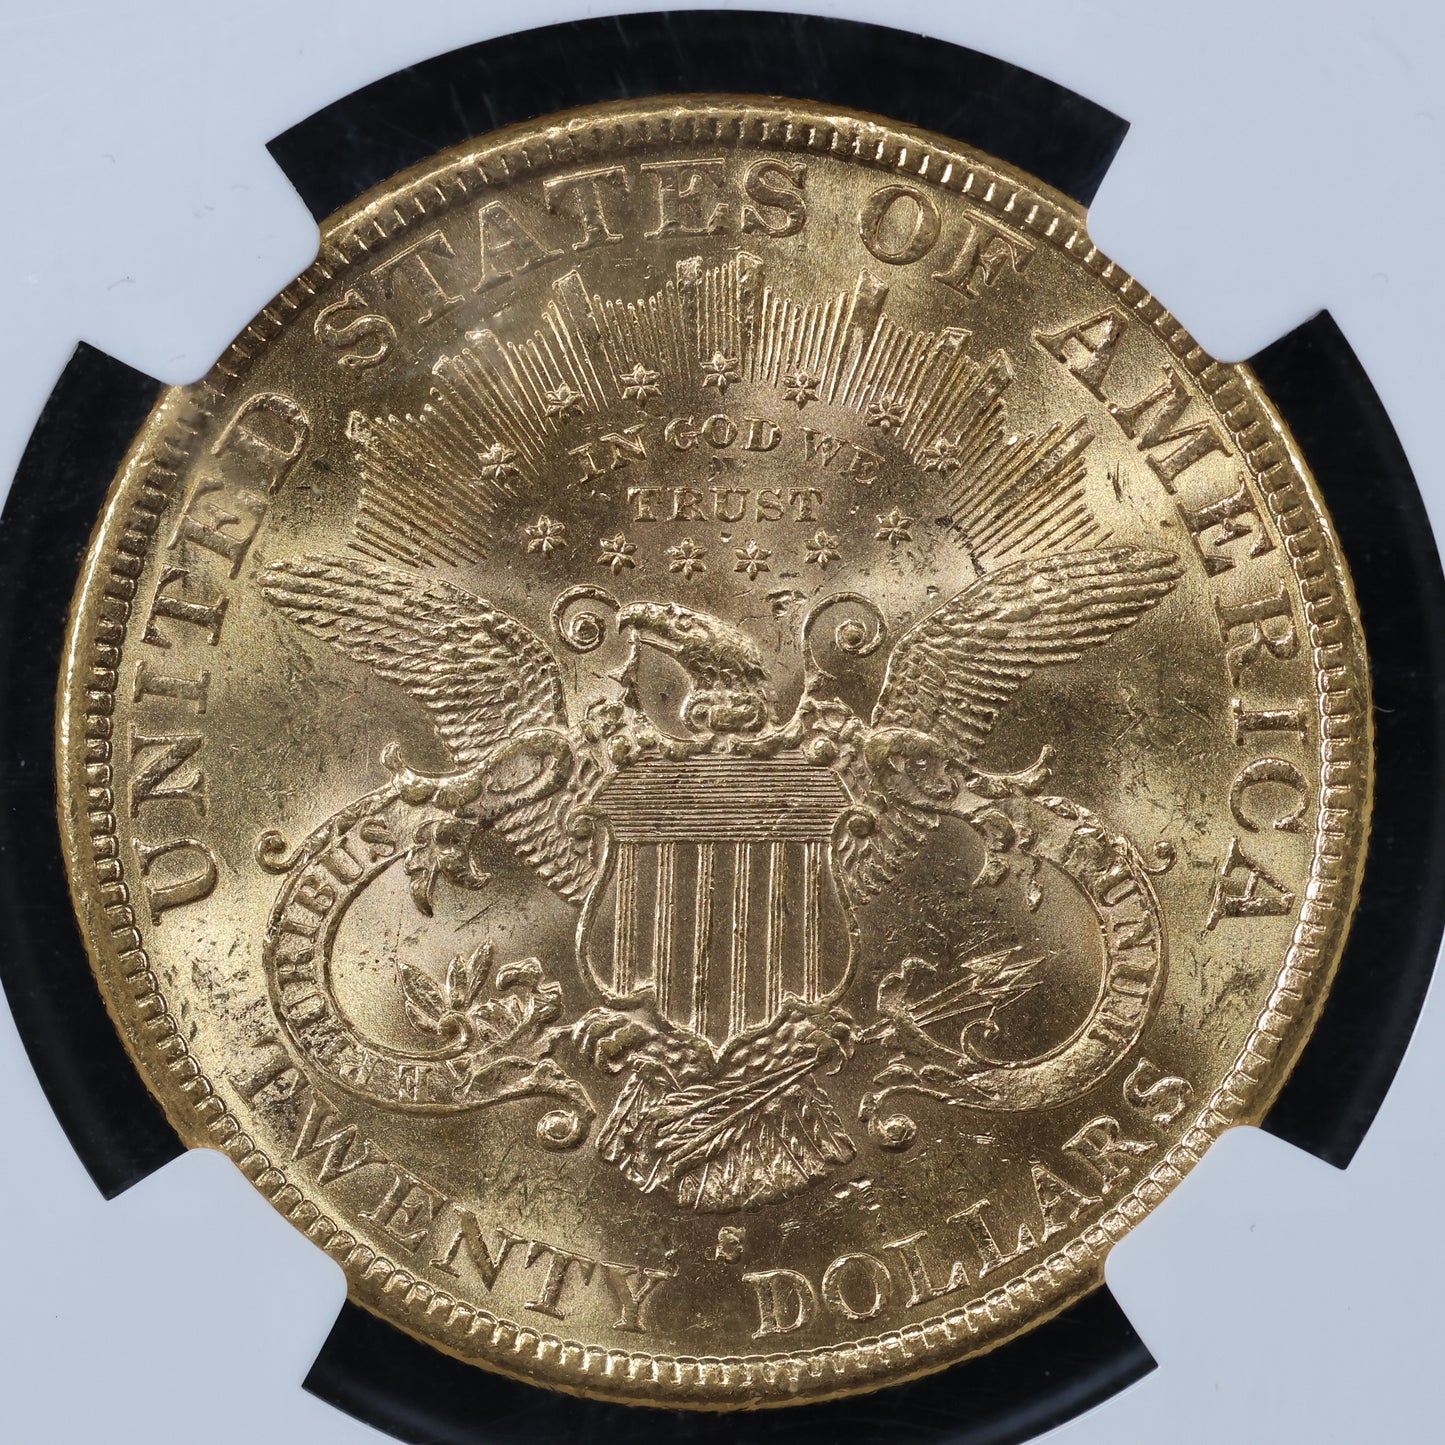 1899 S (San Francisco) $20 Liberty Head US Gold Double Eagle Coin - NGC MS 62